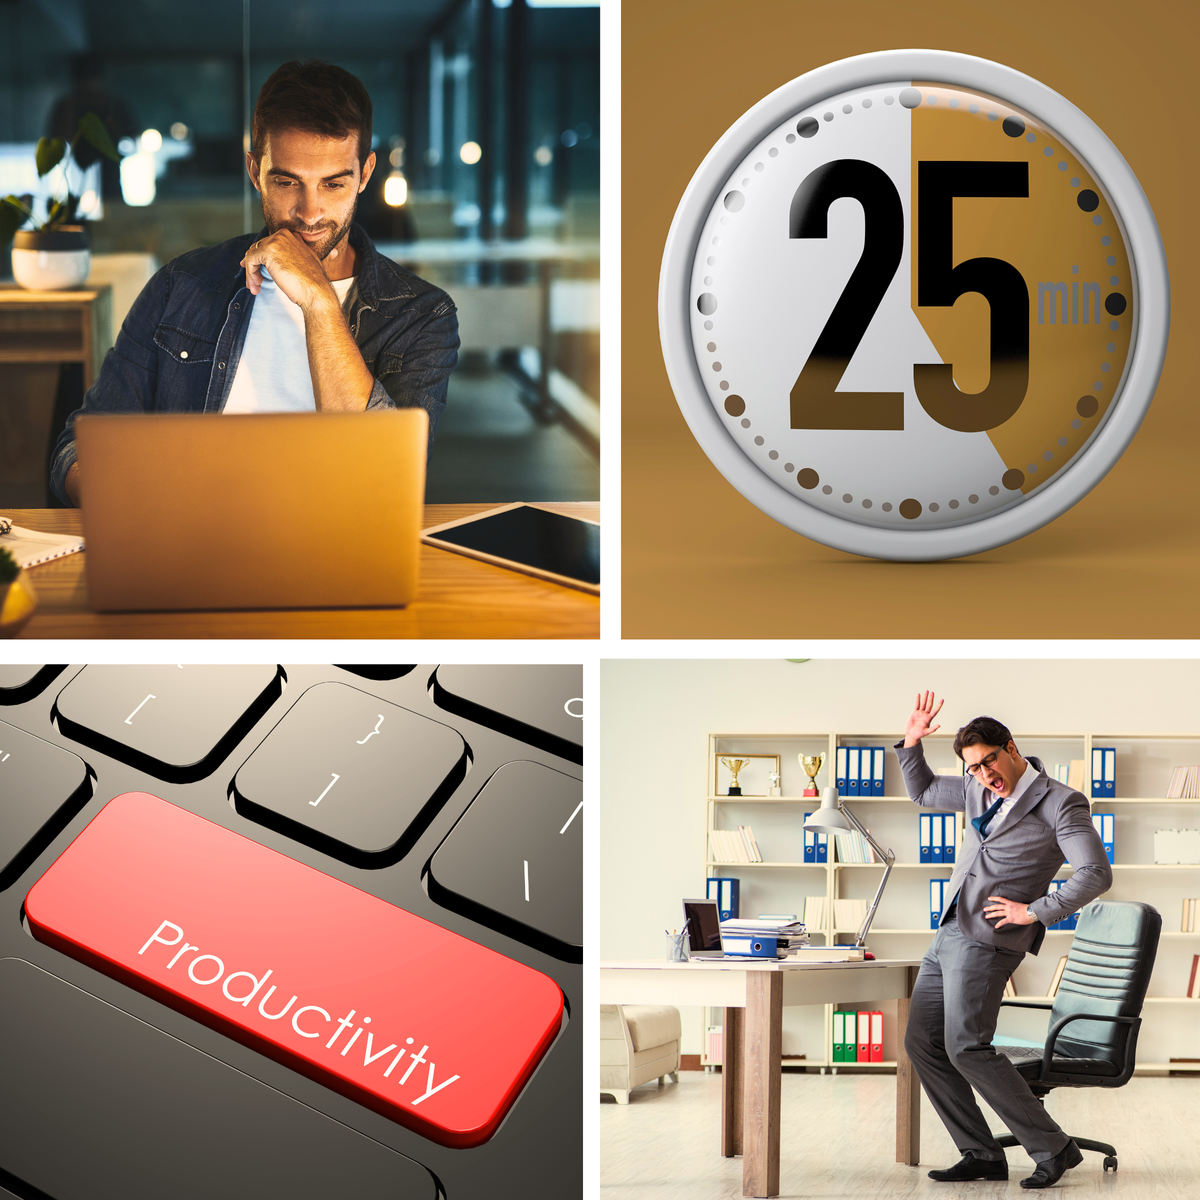 Man working on laptop, 25 minute timer, productivity reminder, man taking break at the office